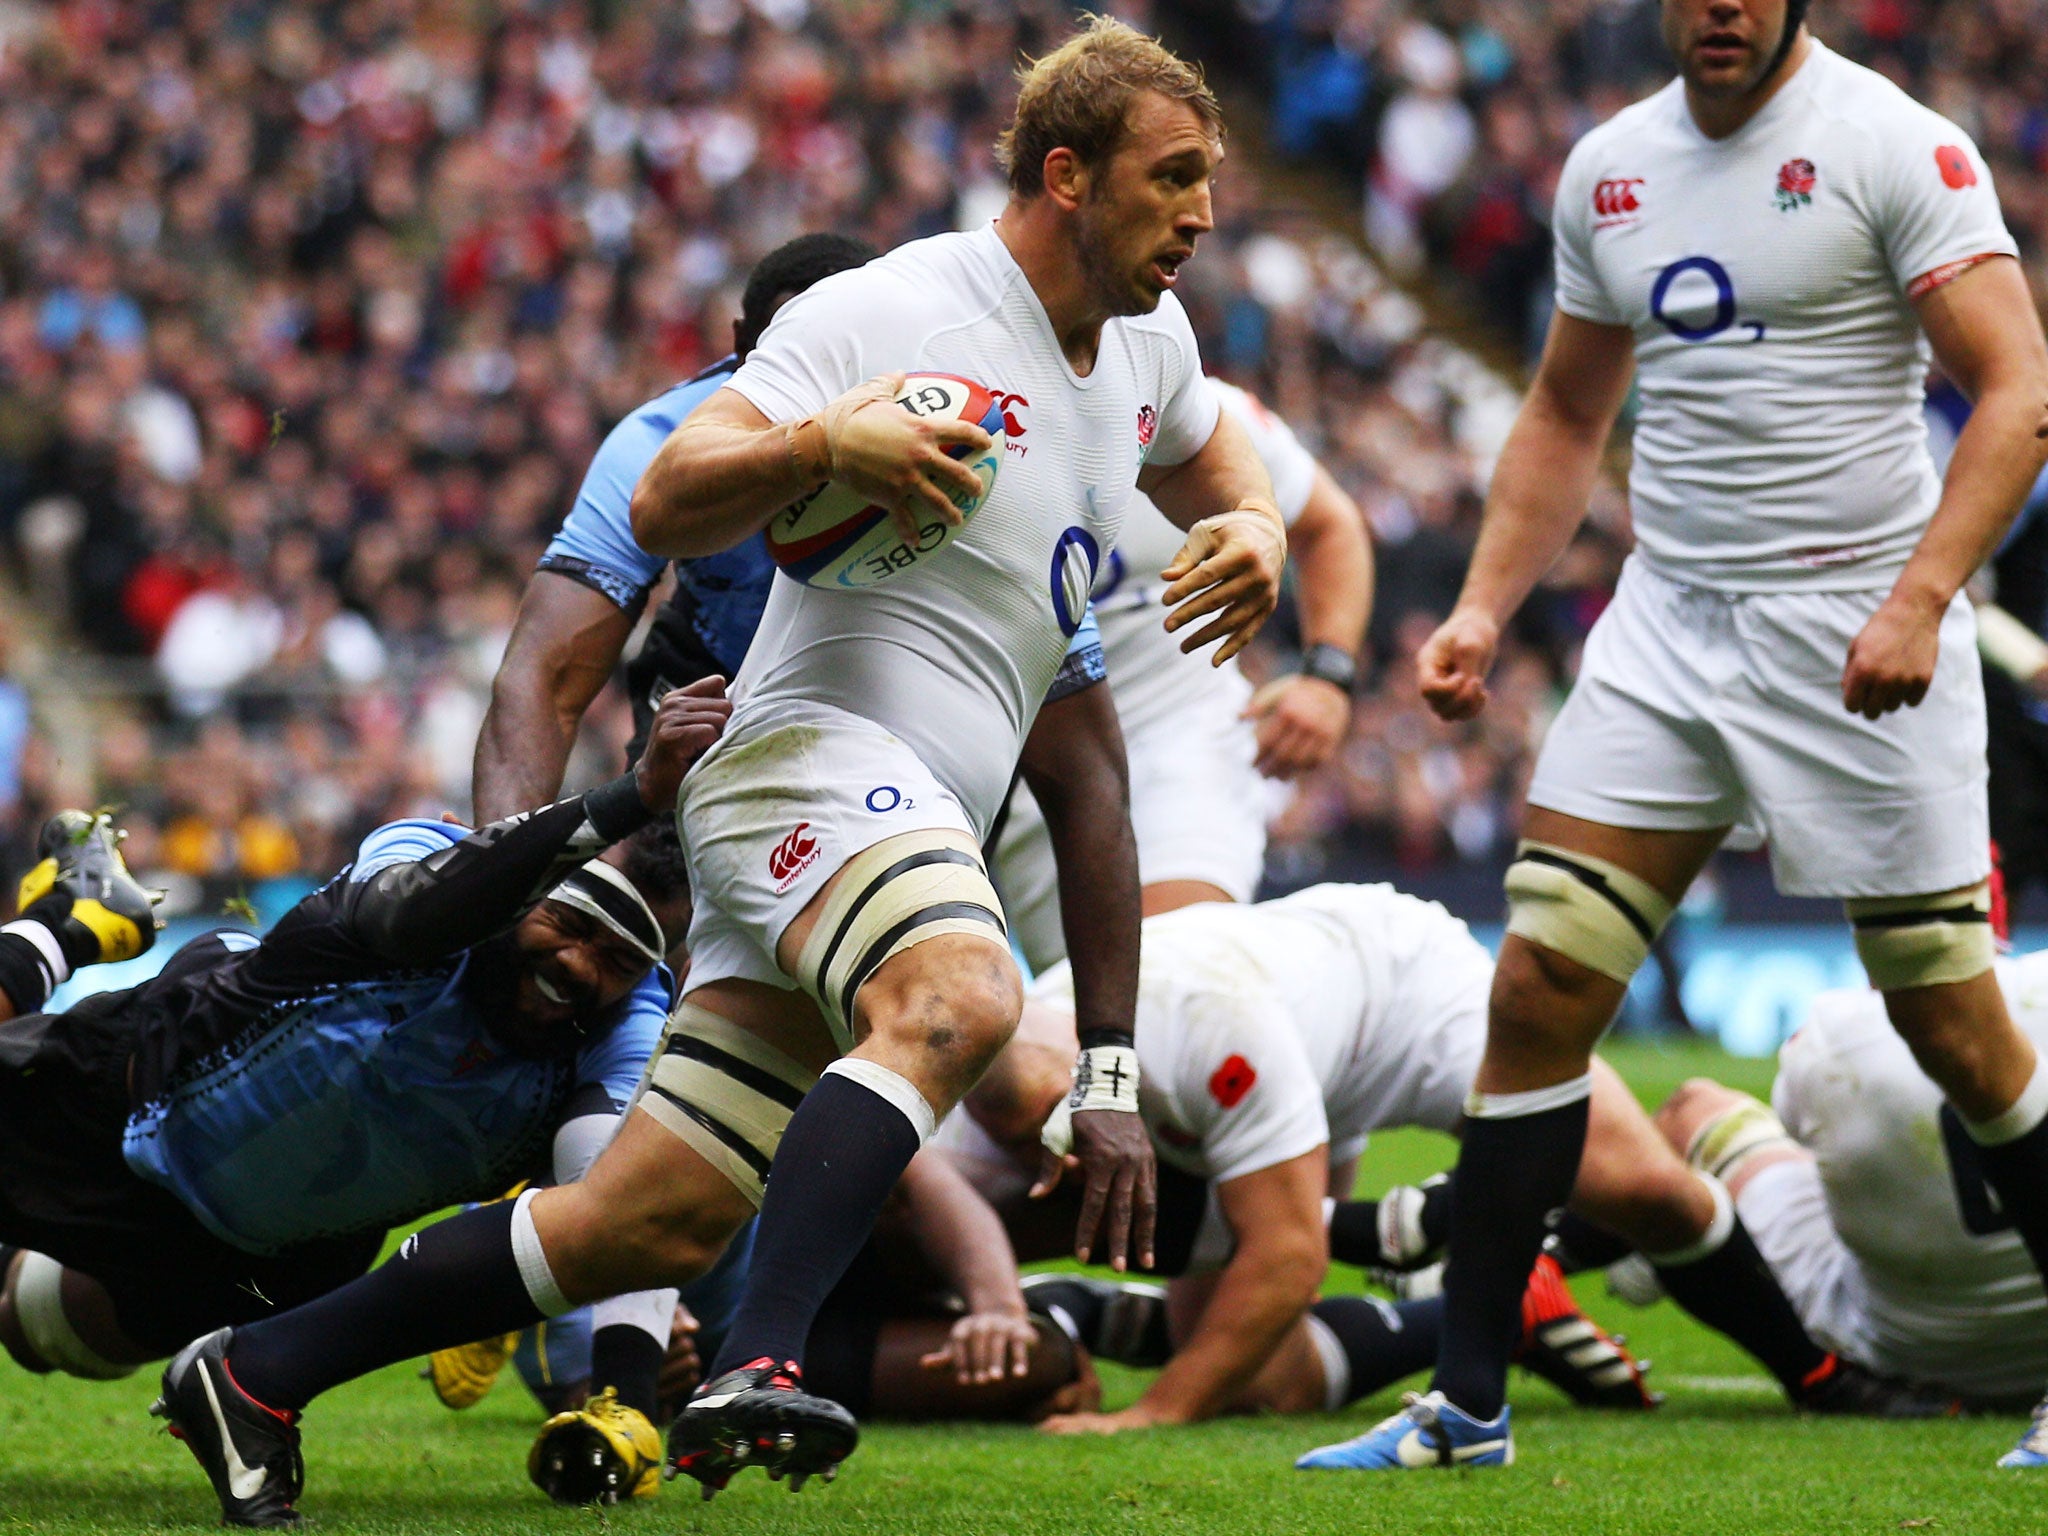 Chris Robshaw was a surprise choice as England captain despite Harlequins’ success in 2012 but he has now led his country 16 times